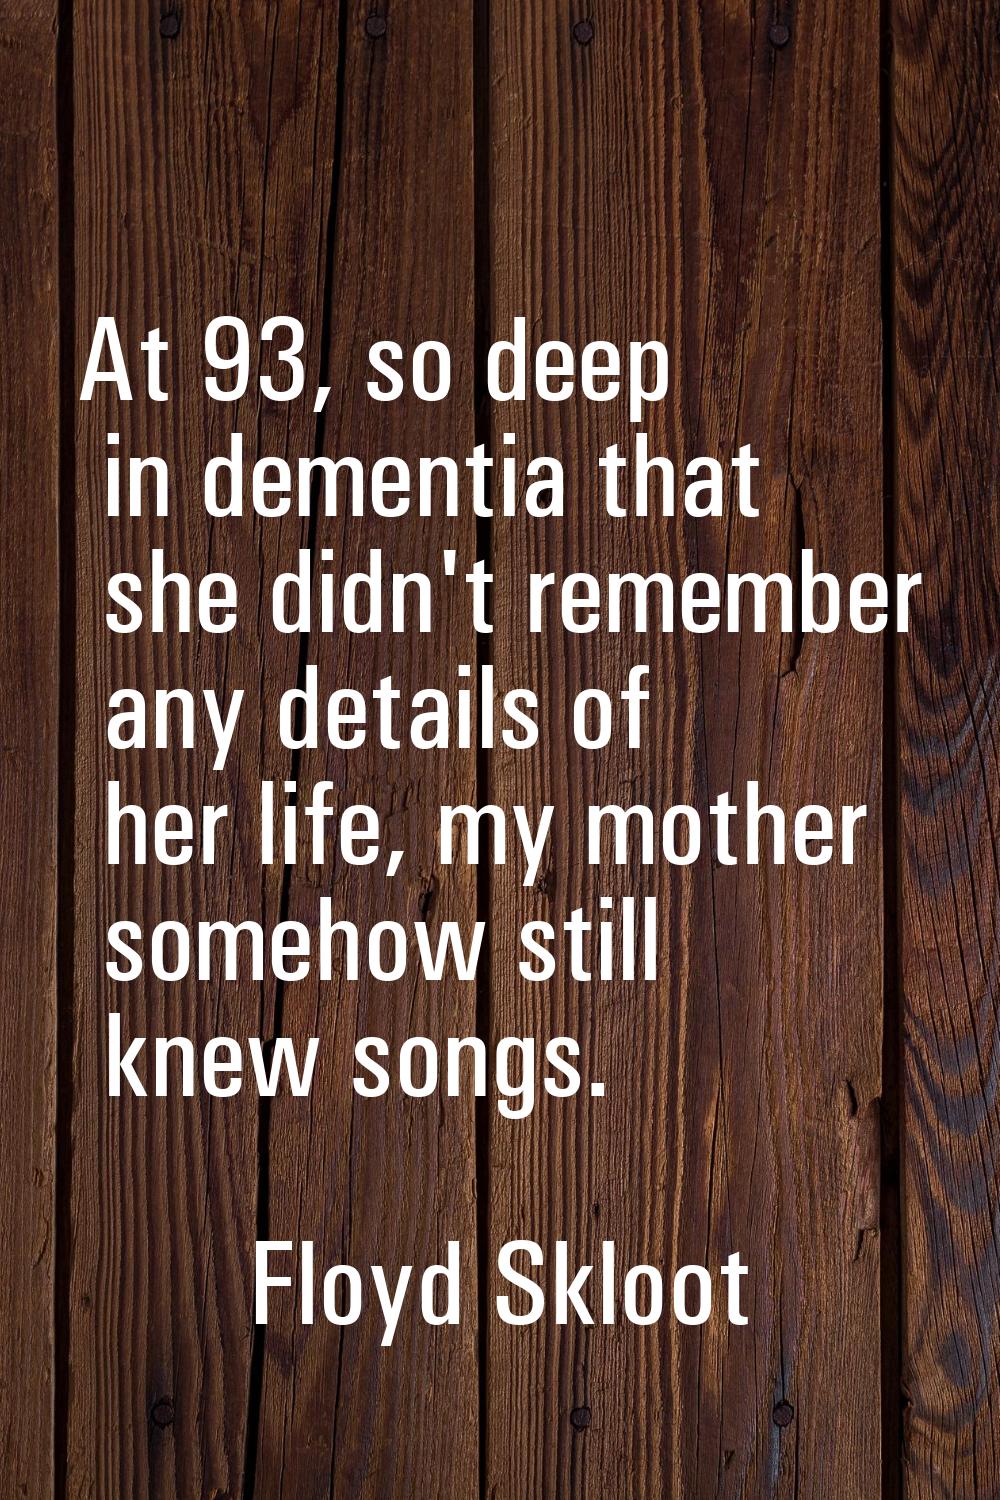 At 93, so deep in dementia that she didn't remember any details of her life, my mother somehow stil